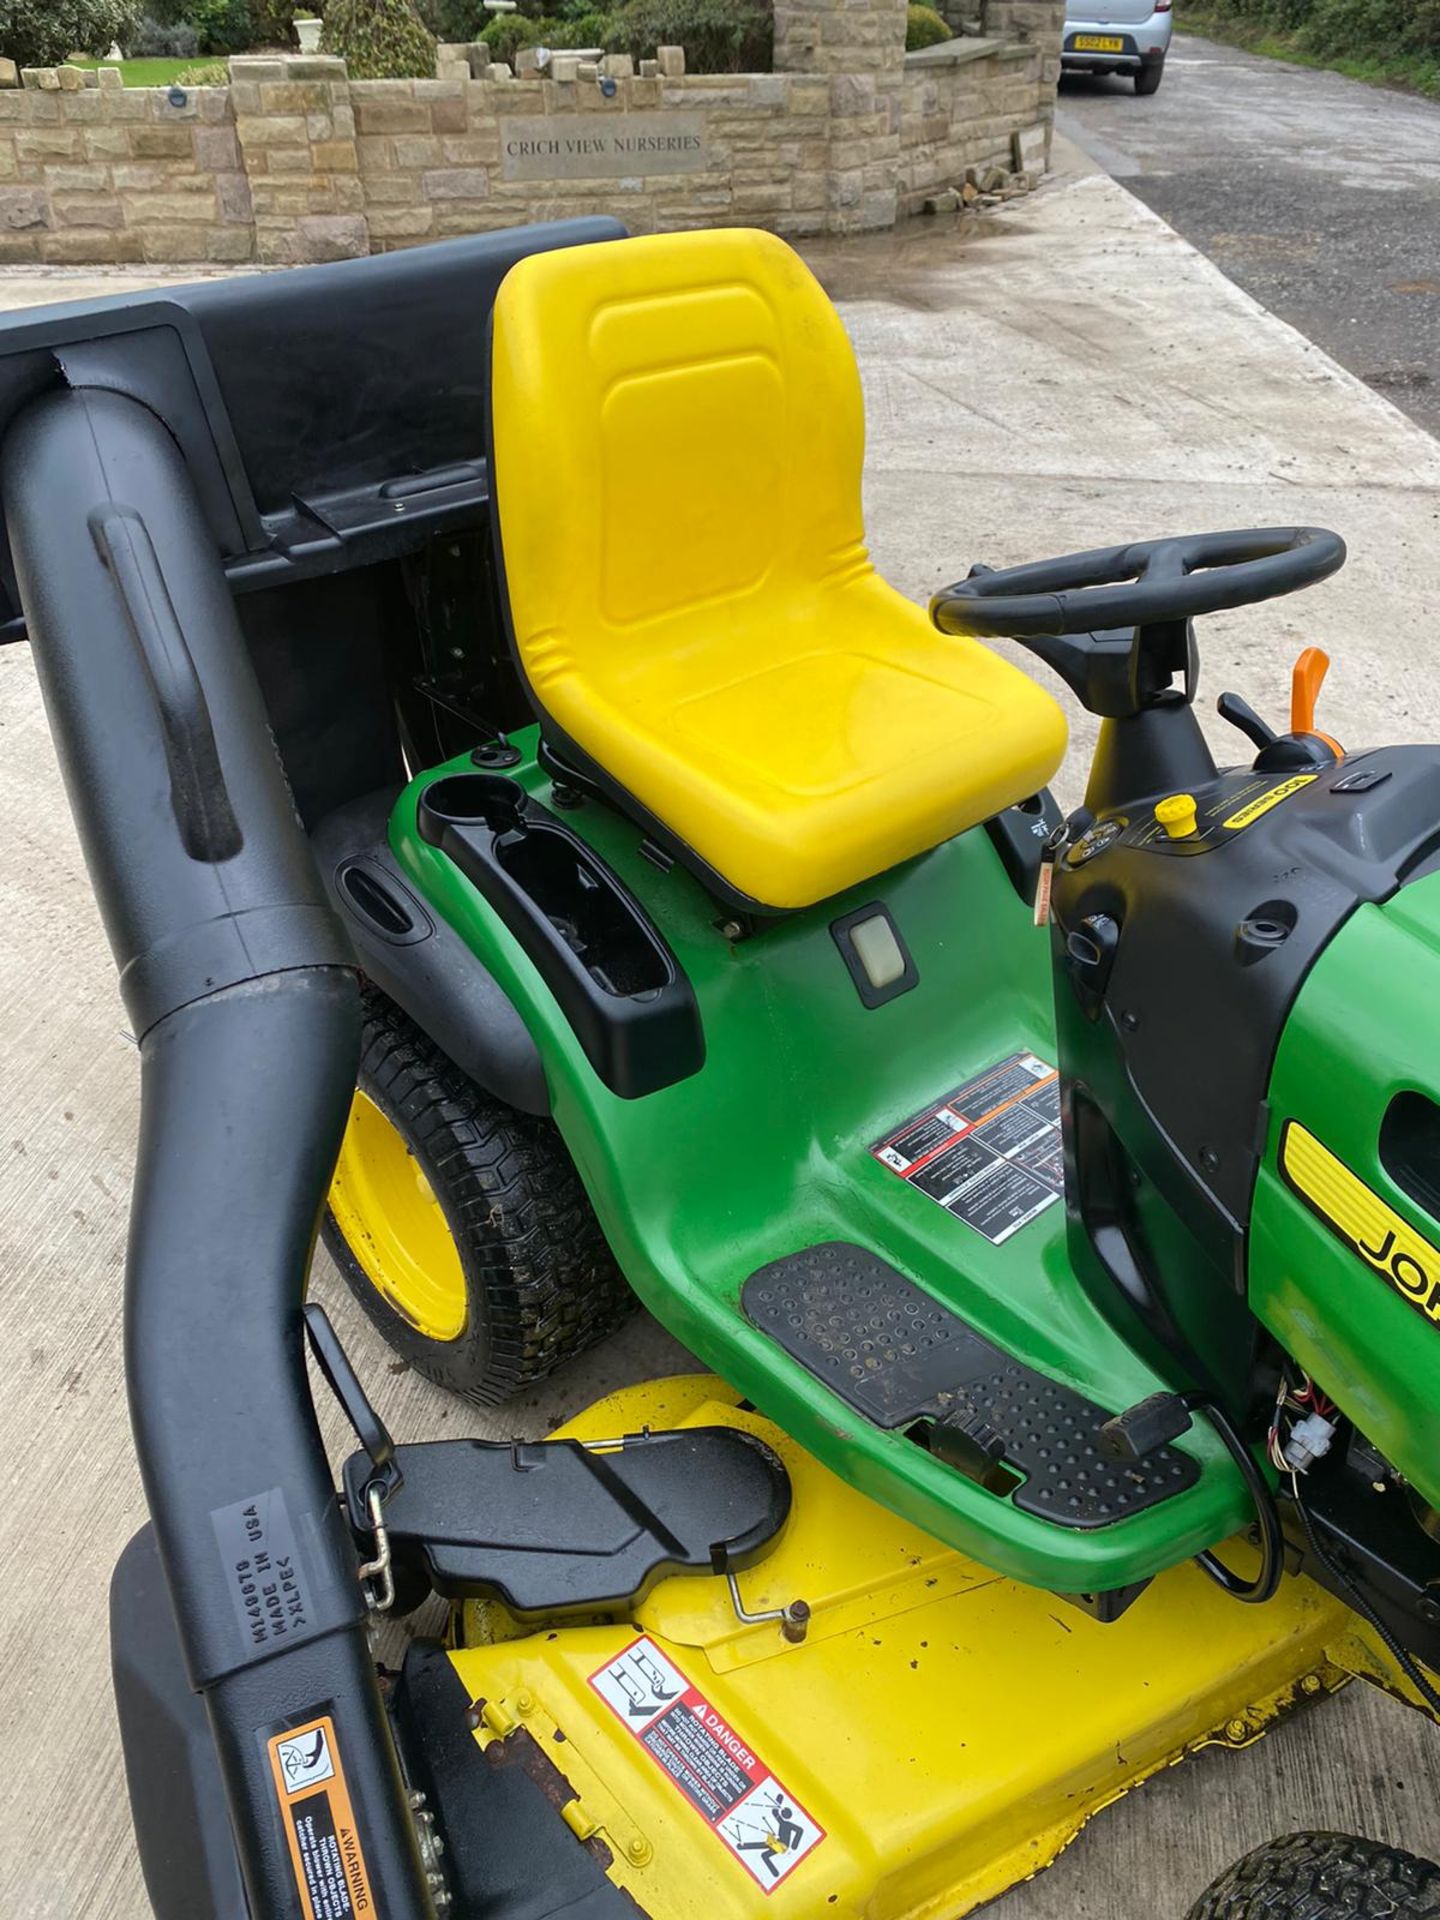 JOHN DEERE LA150 RIDE ON LAWN MOWER, RUNS AND WORKS WELL, 54 INCH CUTTING DECK *NO VAT* - Image 4 of 7